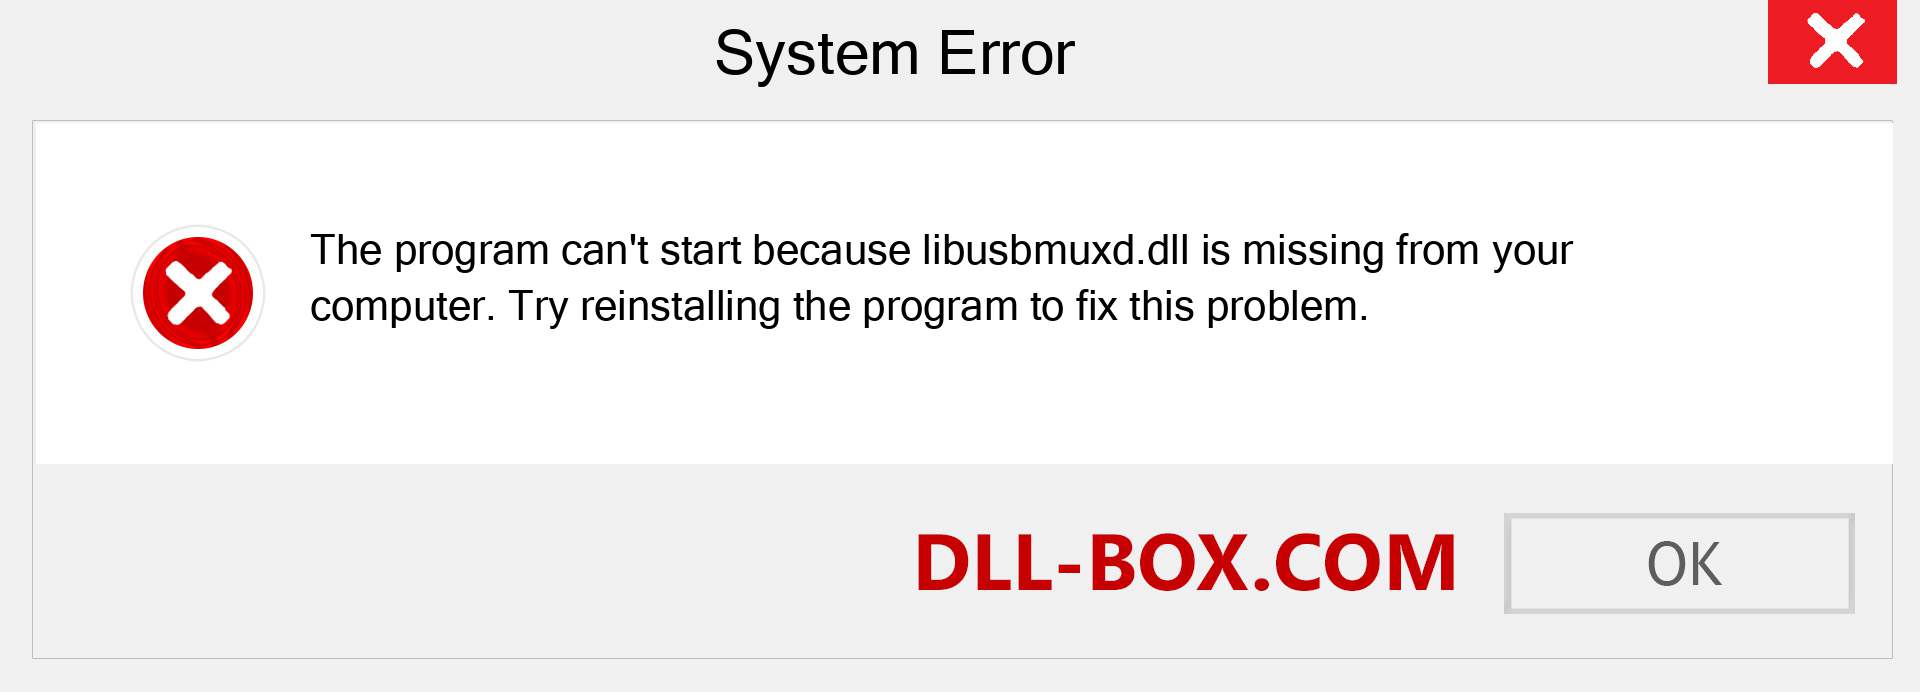  libusbmuxd.dll file is missing?. Download for Windows 7, 8, 10 - Fix  libusbmuxd dll Missing Error on Windows, photos, images